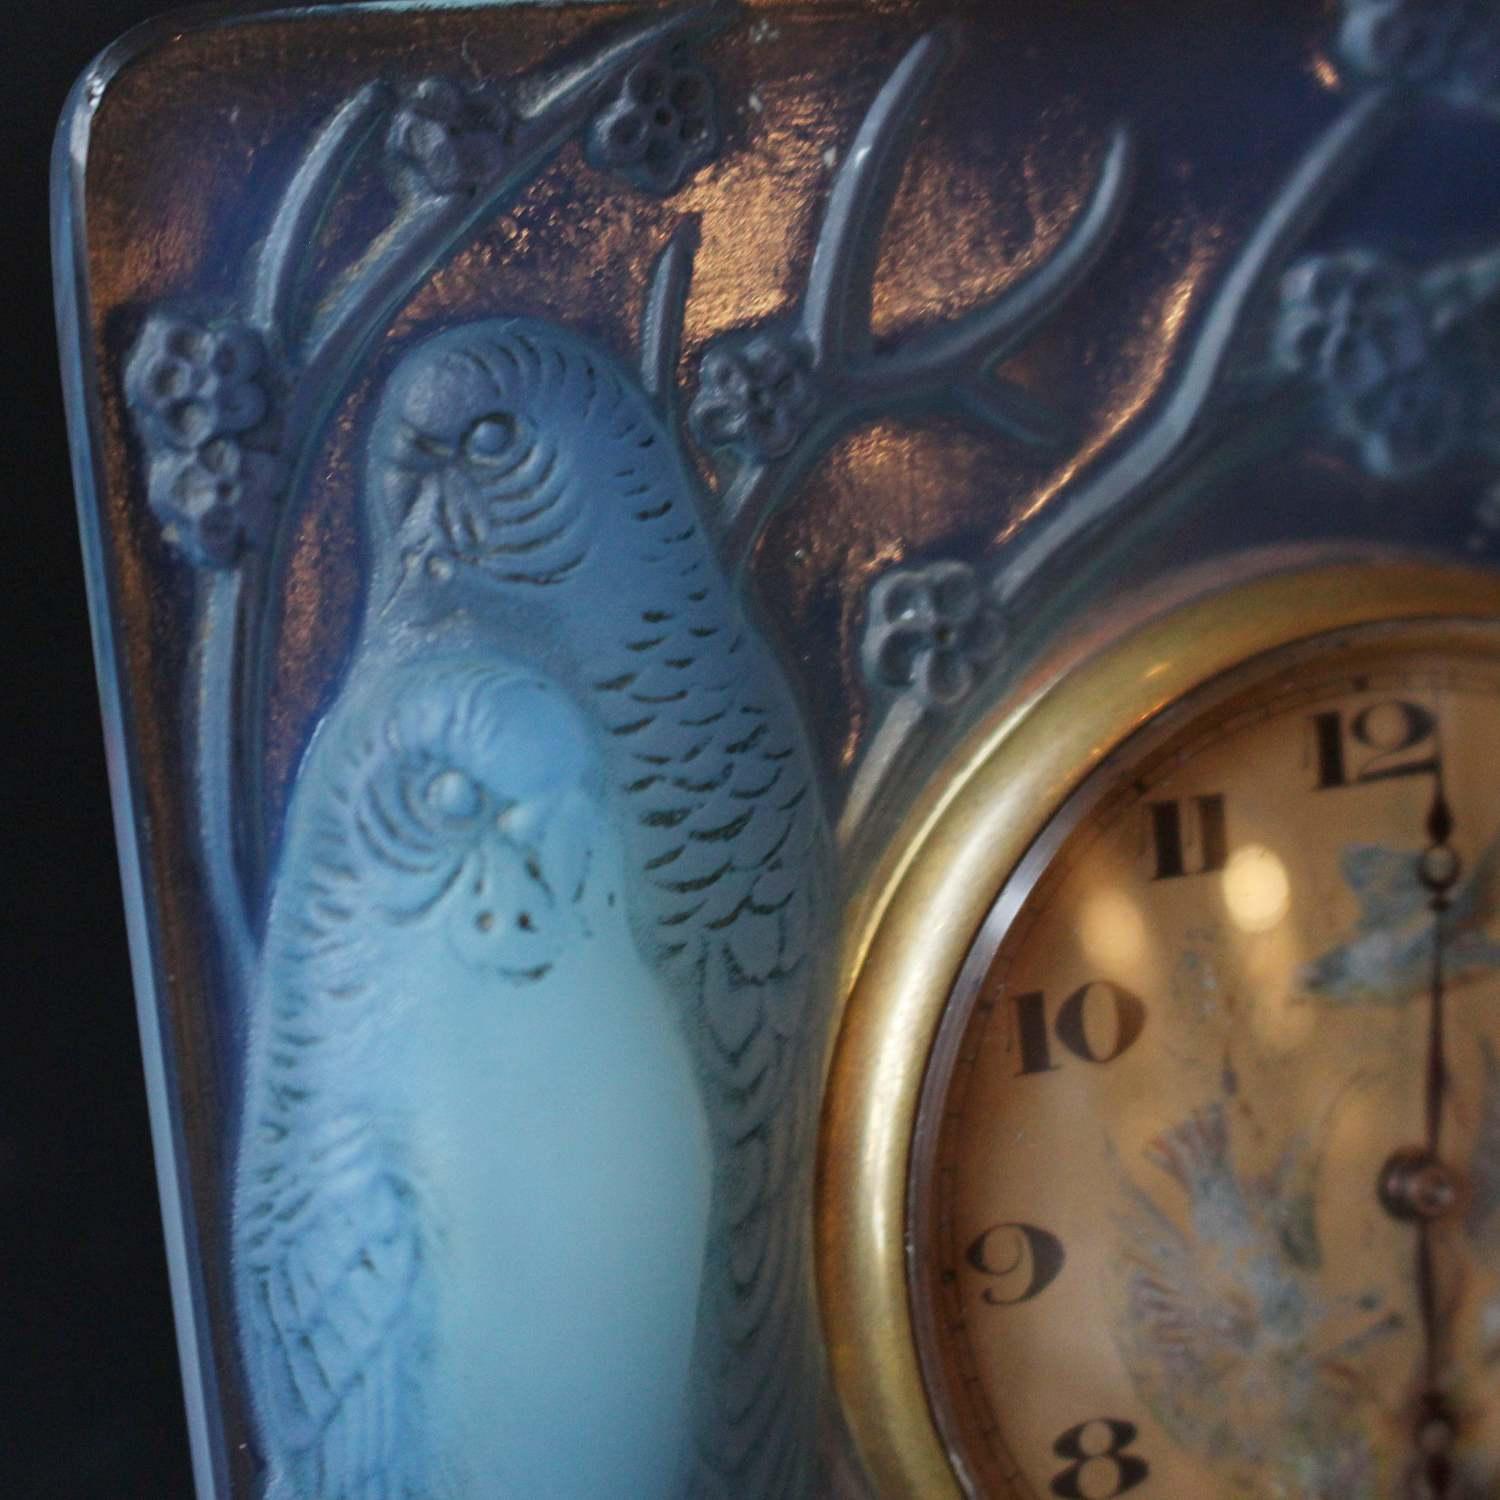 René Lalique 'Inseparables' Uhr im Zustand „Gut“ in Forest Row, East Sussex